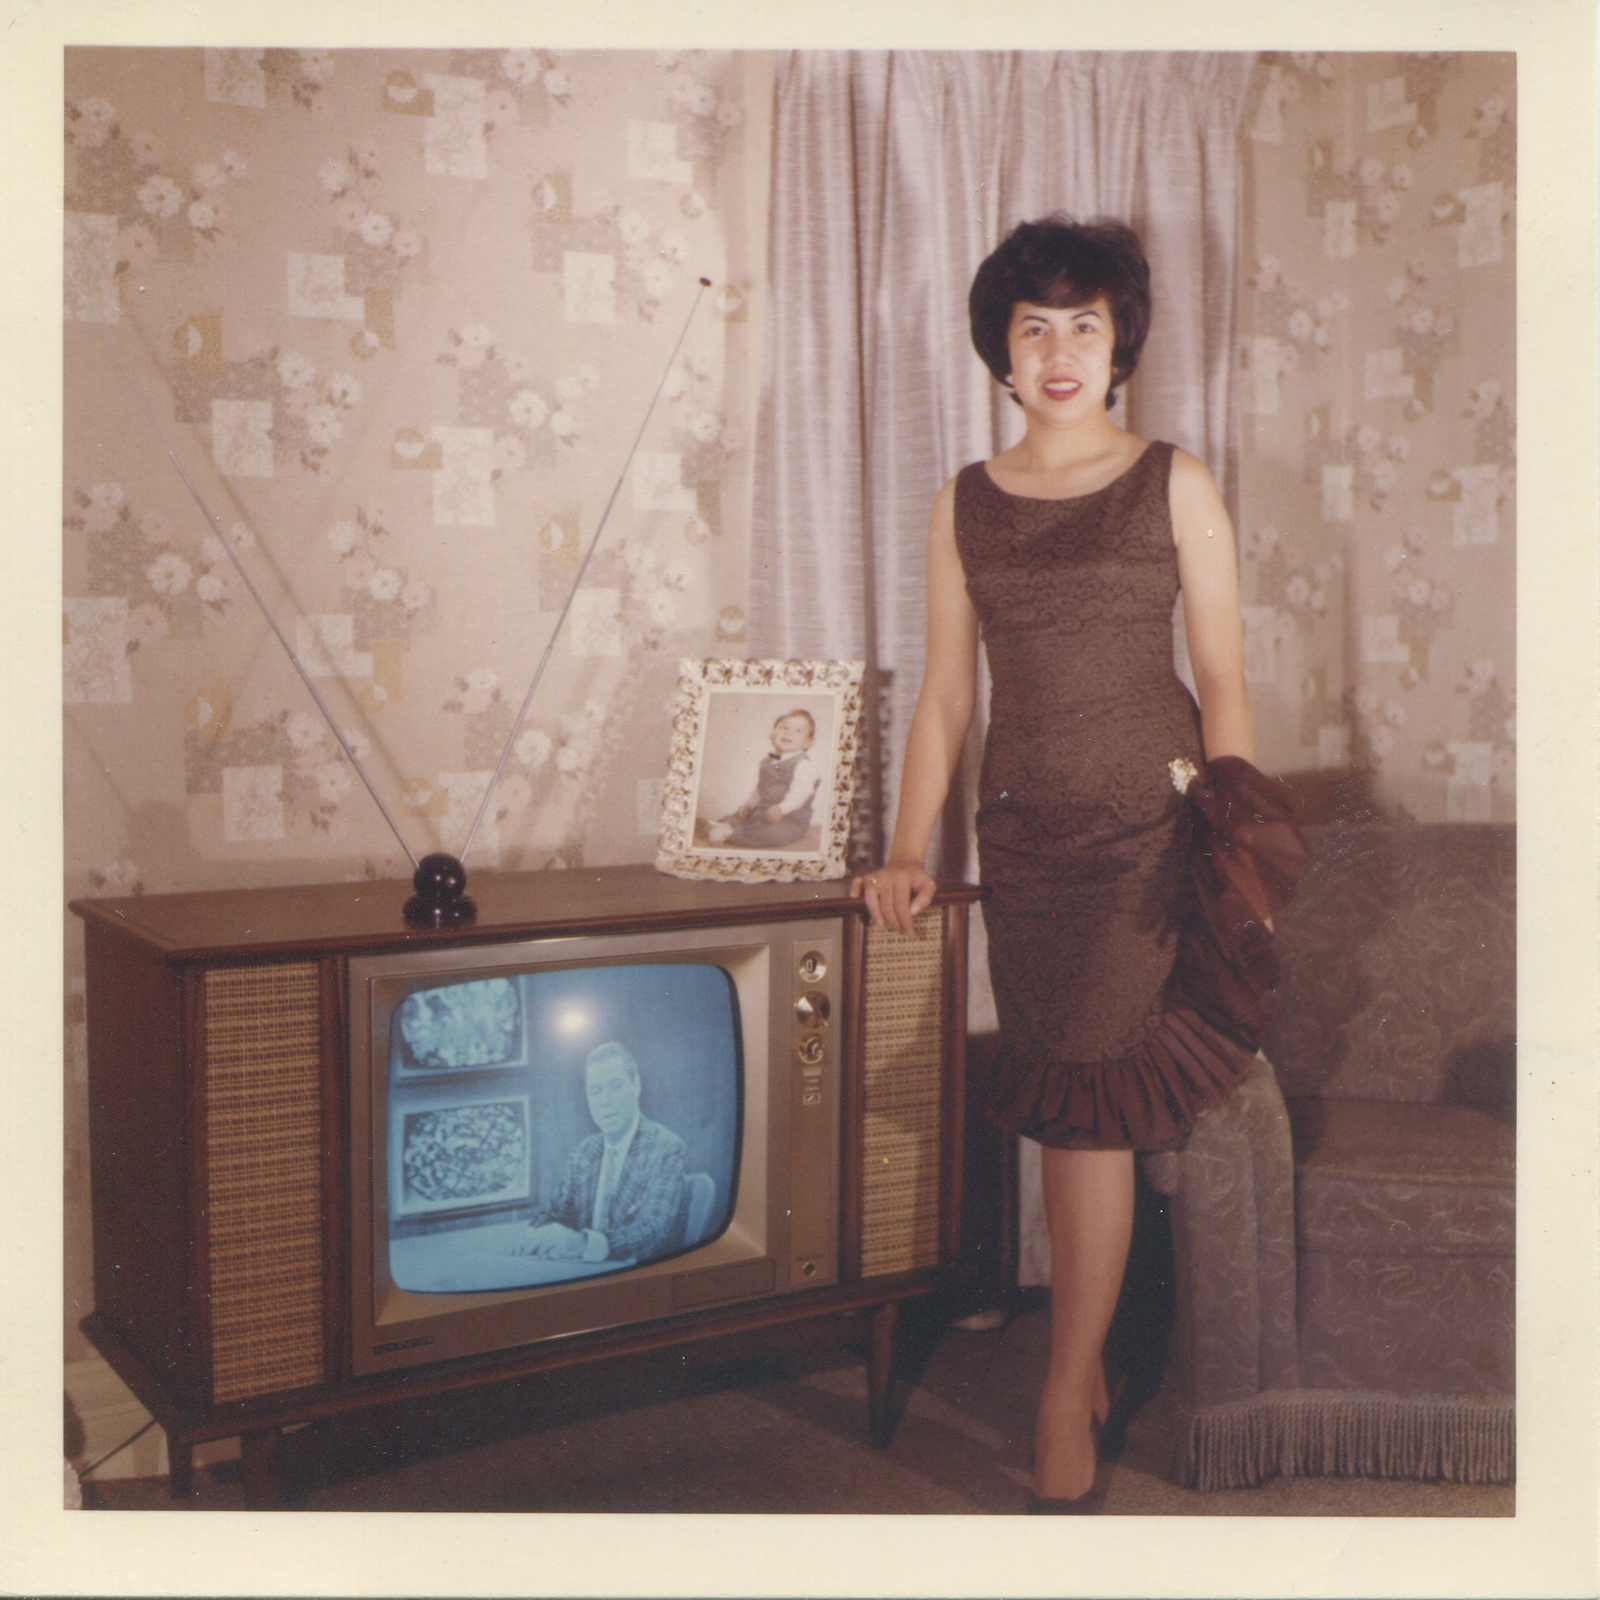 Woman in evening wear posing in front of TV